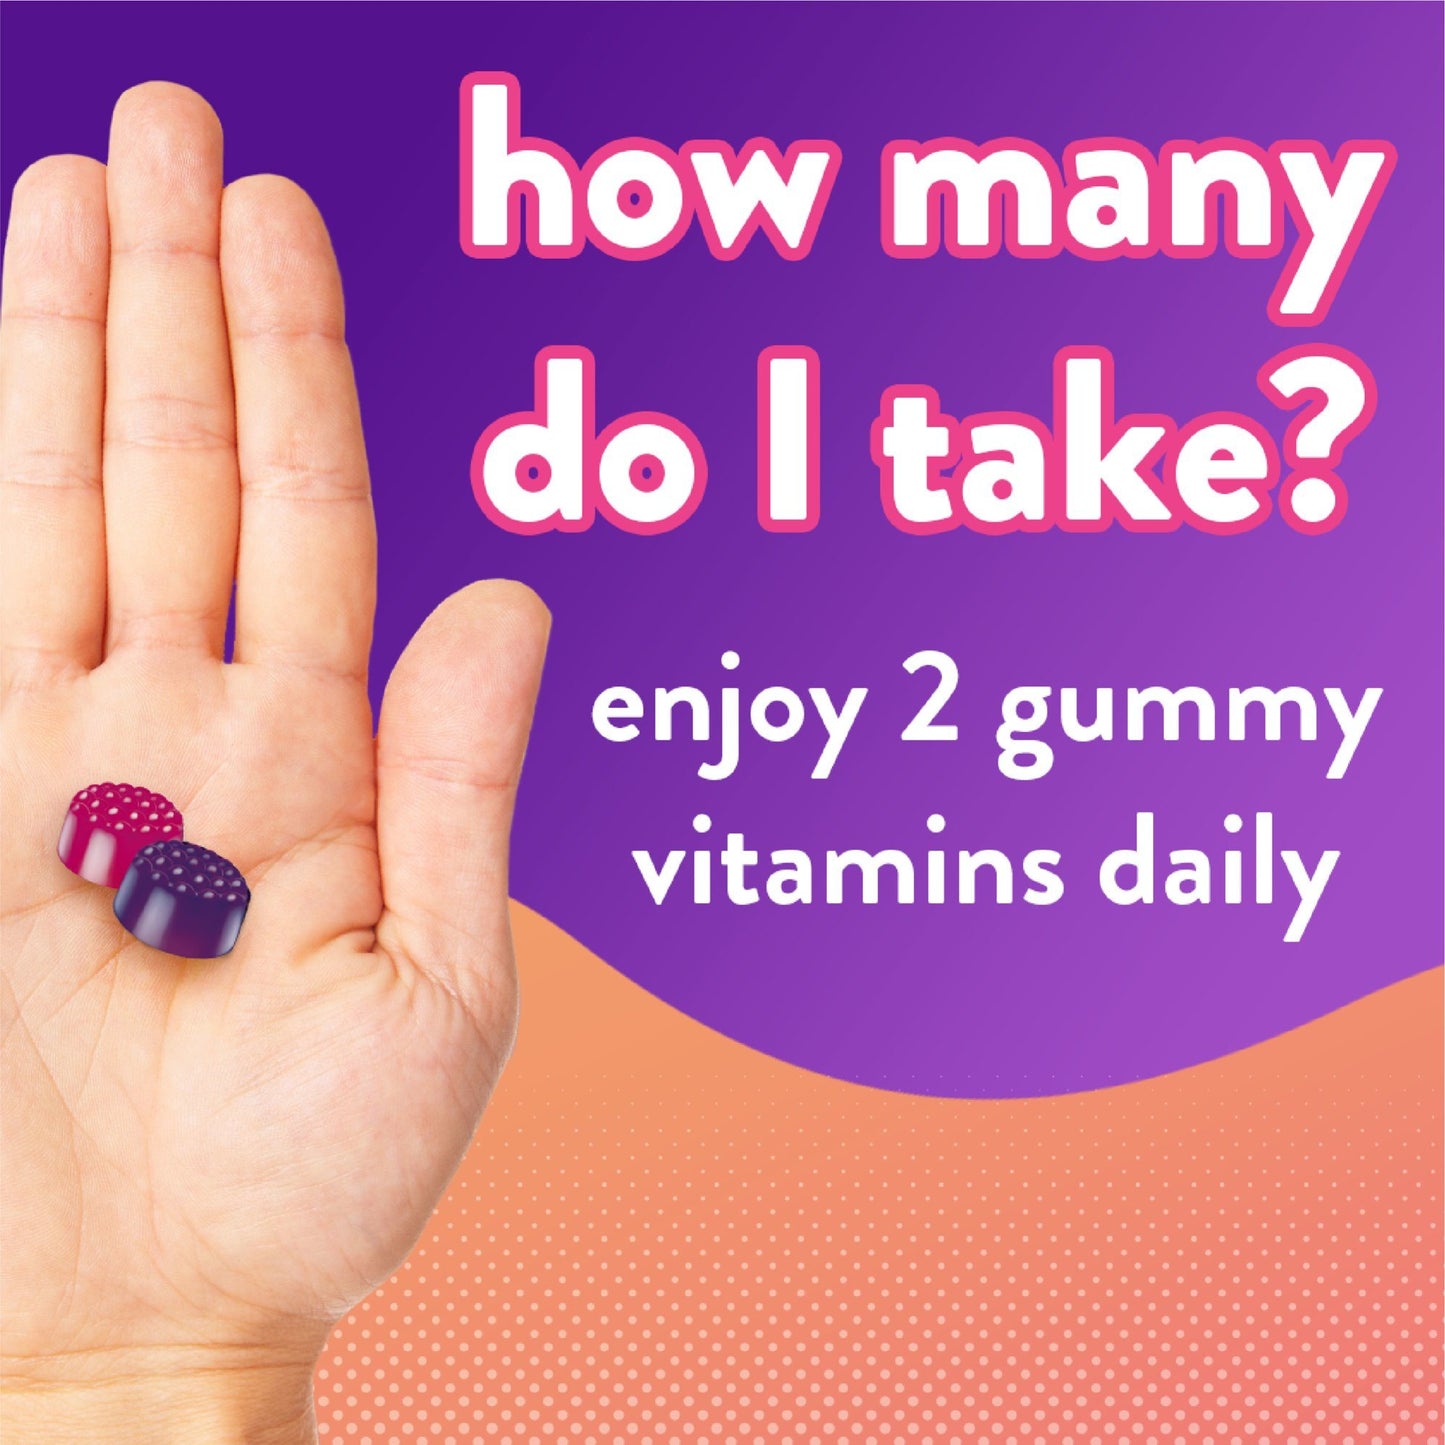 Vitafusion Women's Multivitamin Gummies;  Daily Vitamins for Women;  Berry Flavored;  150 Count